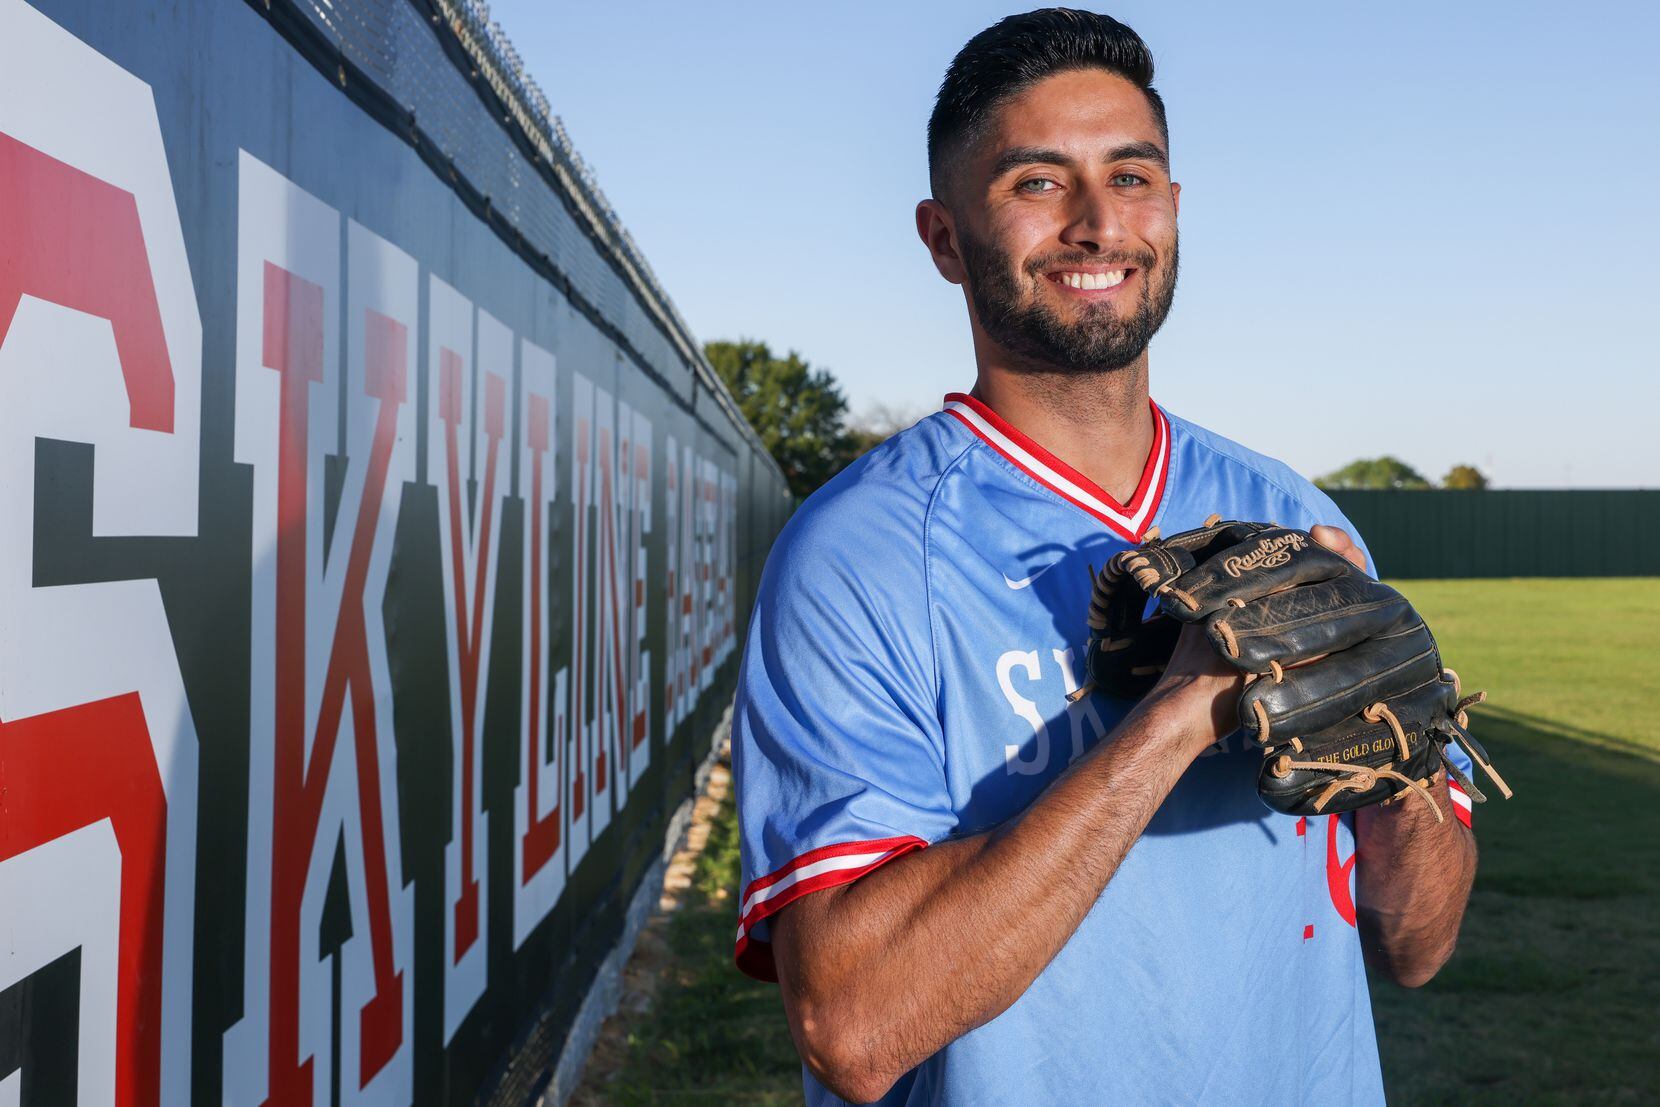 How Skyline alum Shahid Sattar went from out of baseball to the